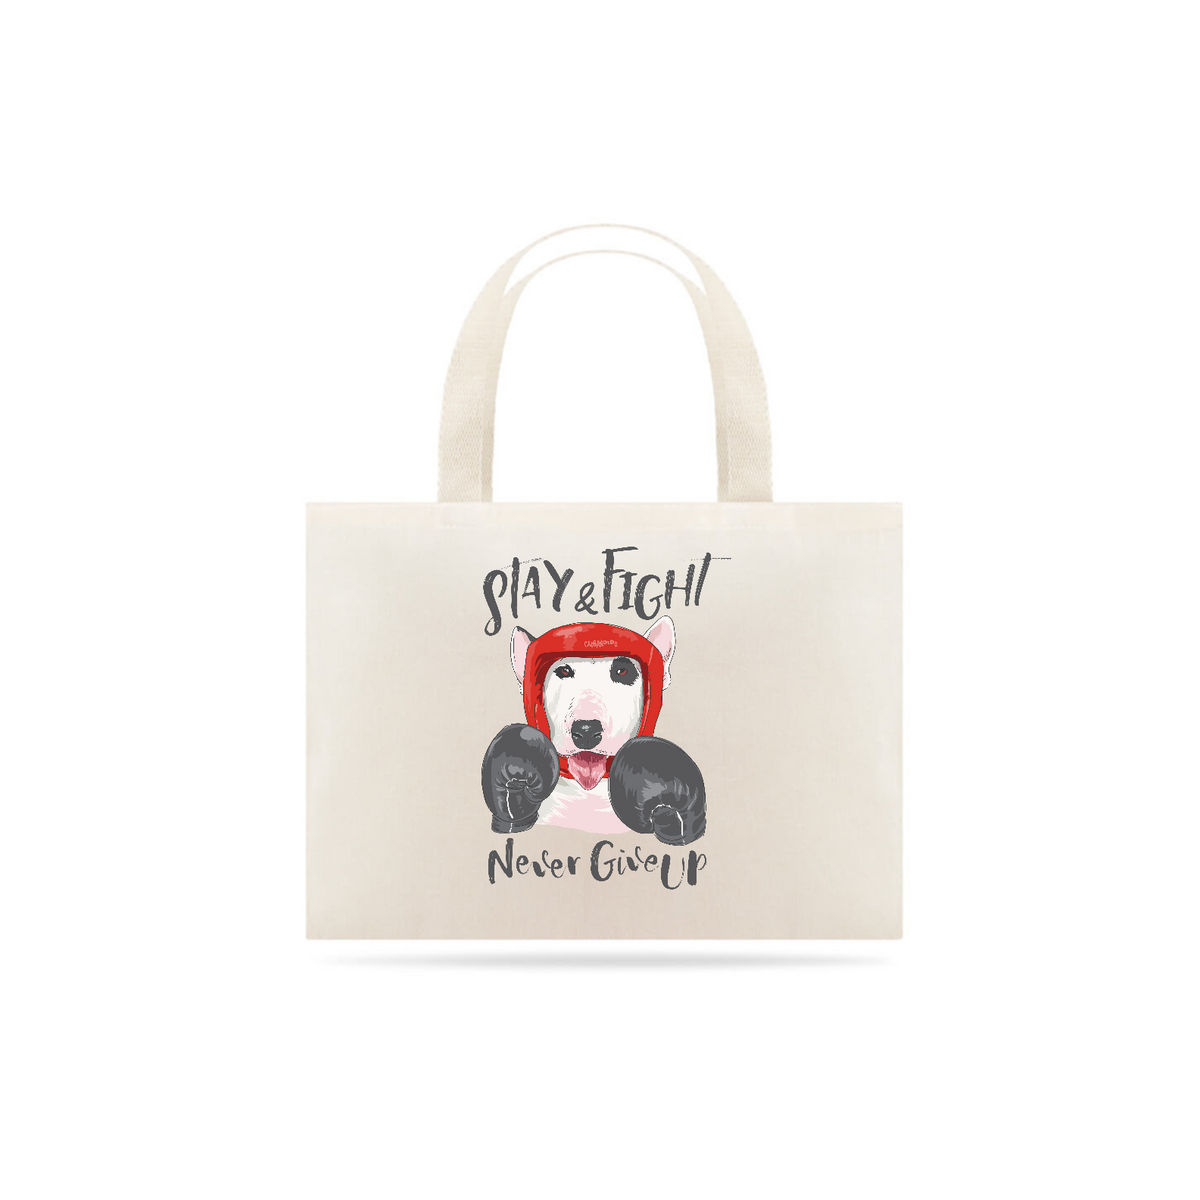 Nome do produto: Ecobag Stay and Fight - Never Give Up